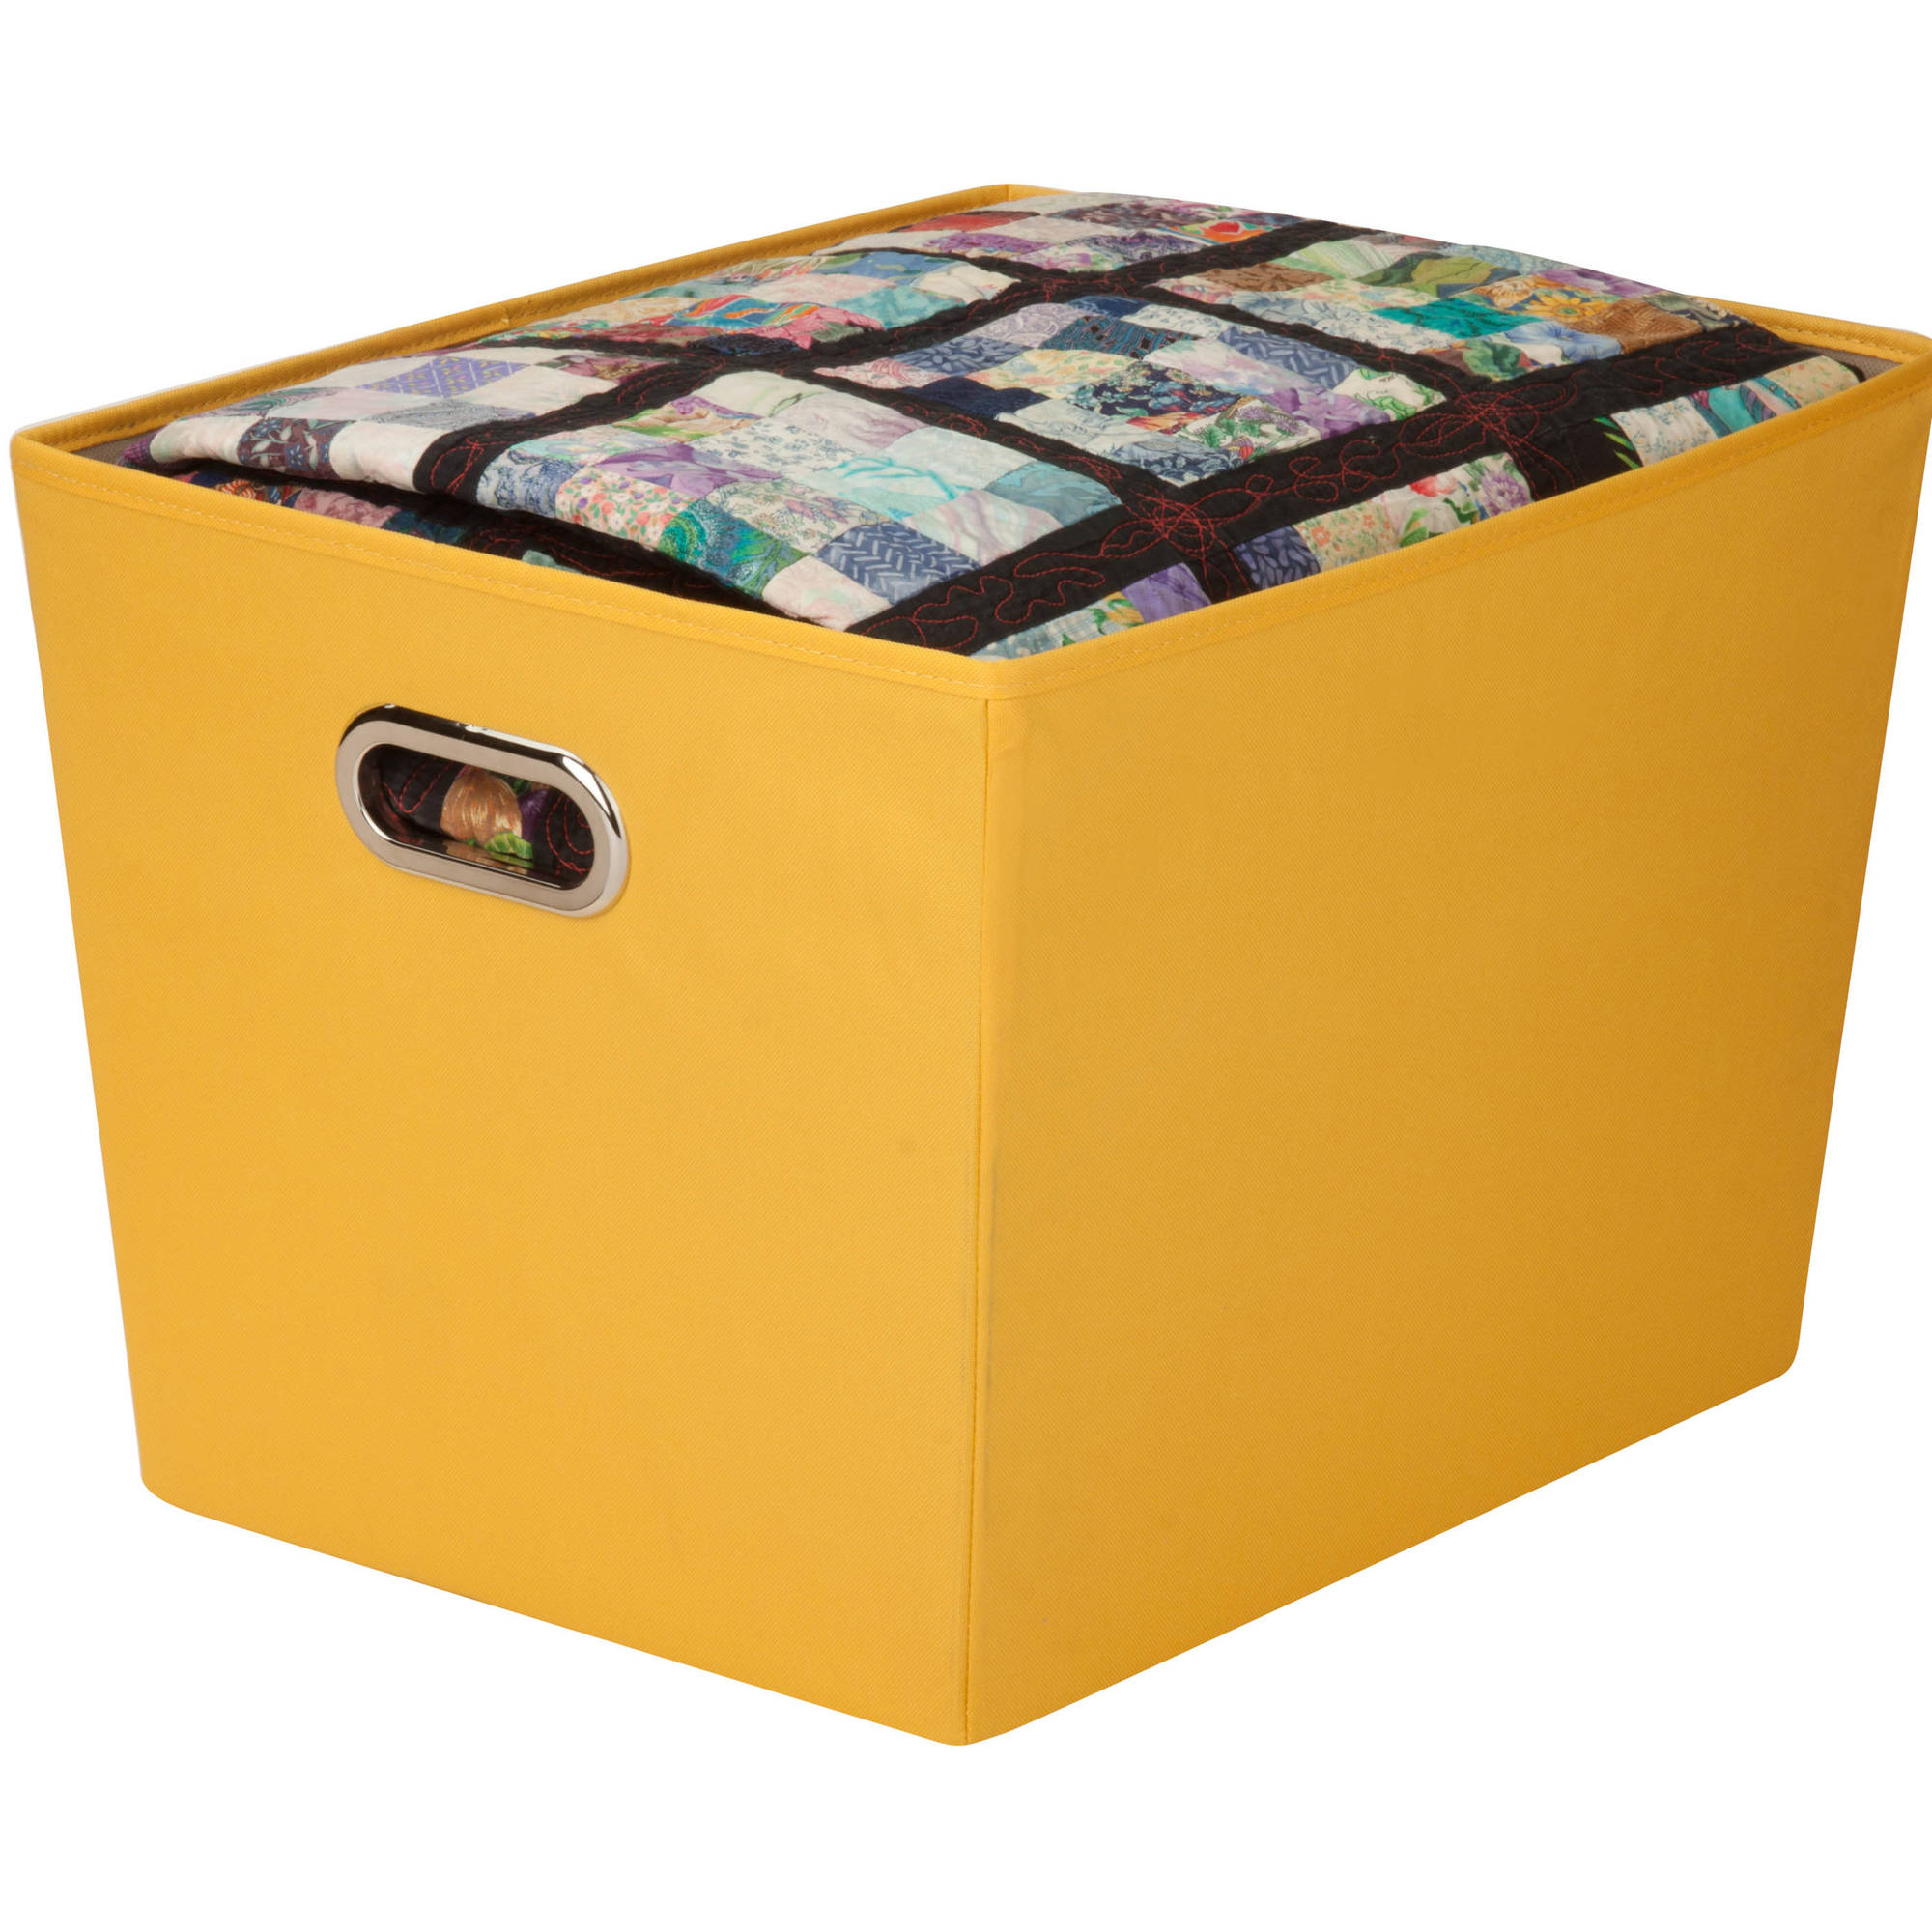 Honey Can Do Large Decorative Storage Bin with Handles, Multicolor - image 1 of 4